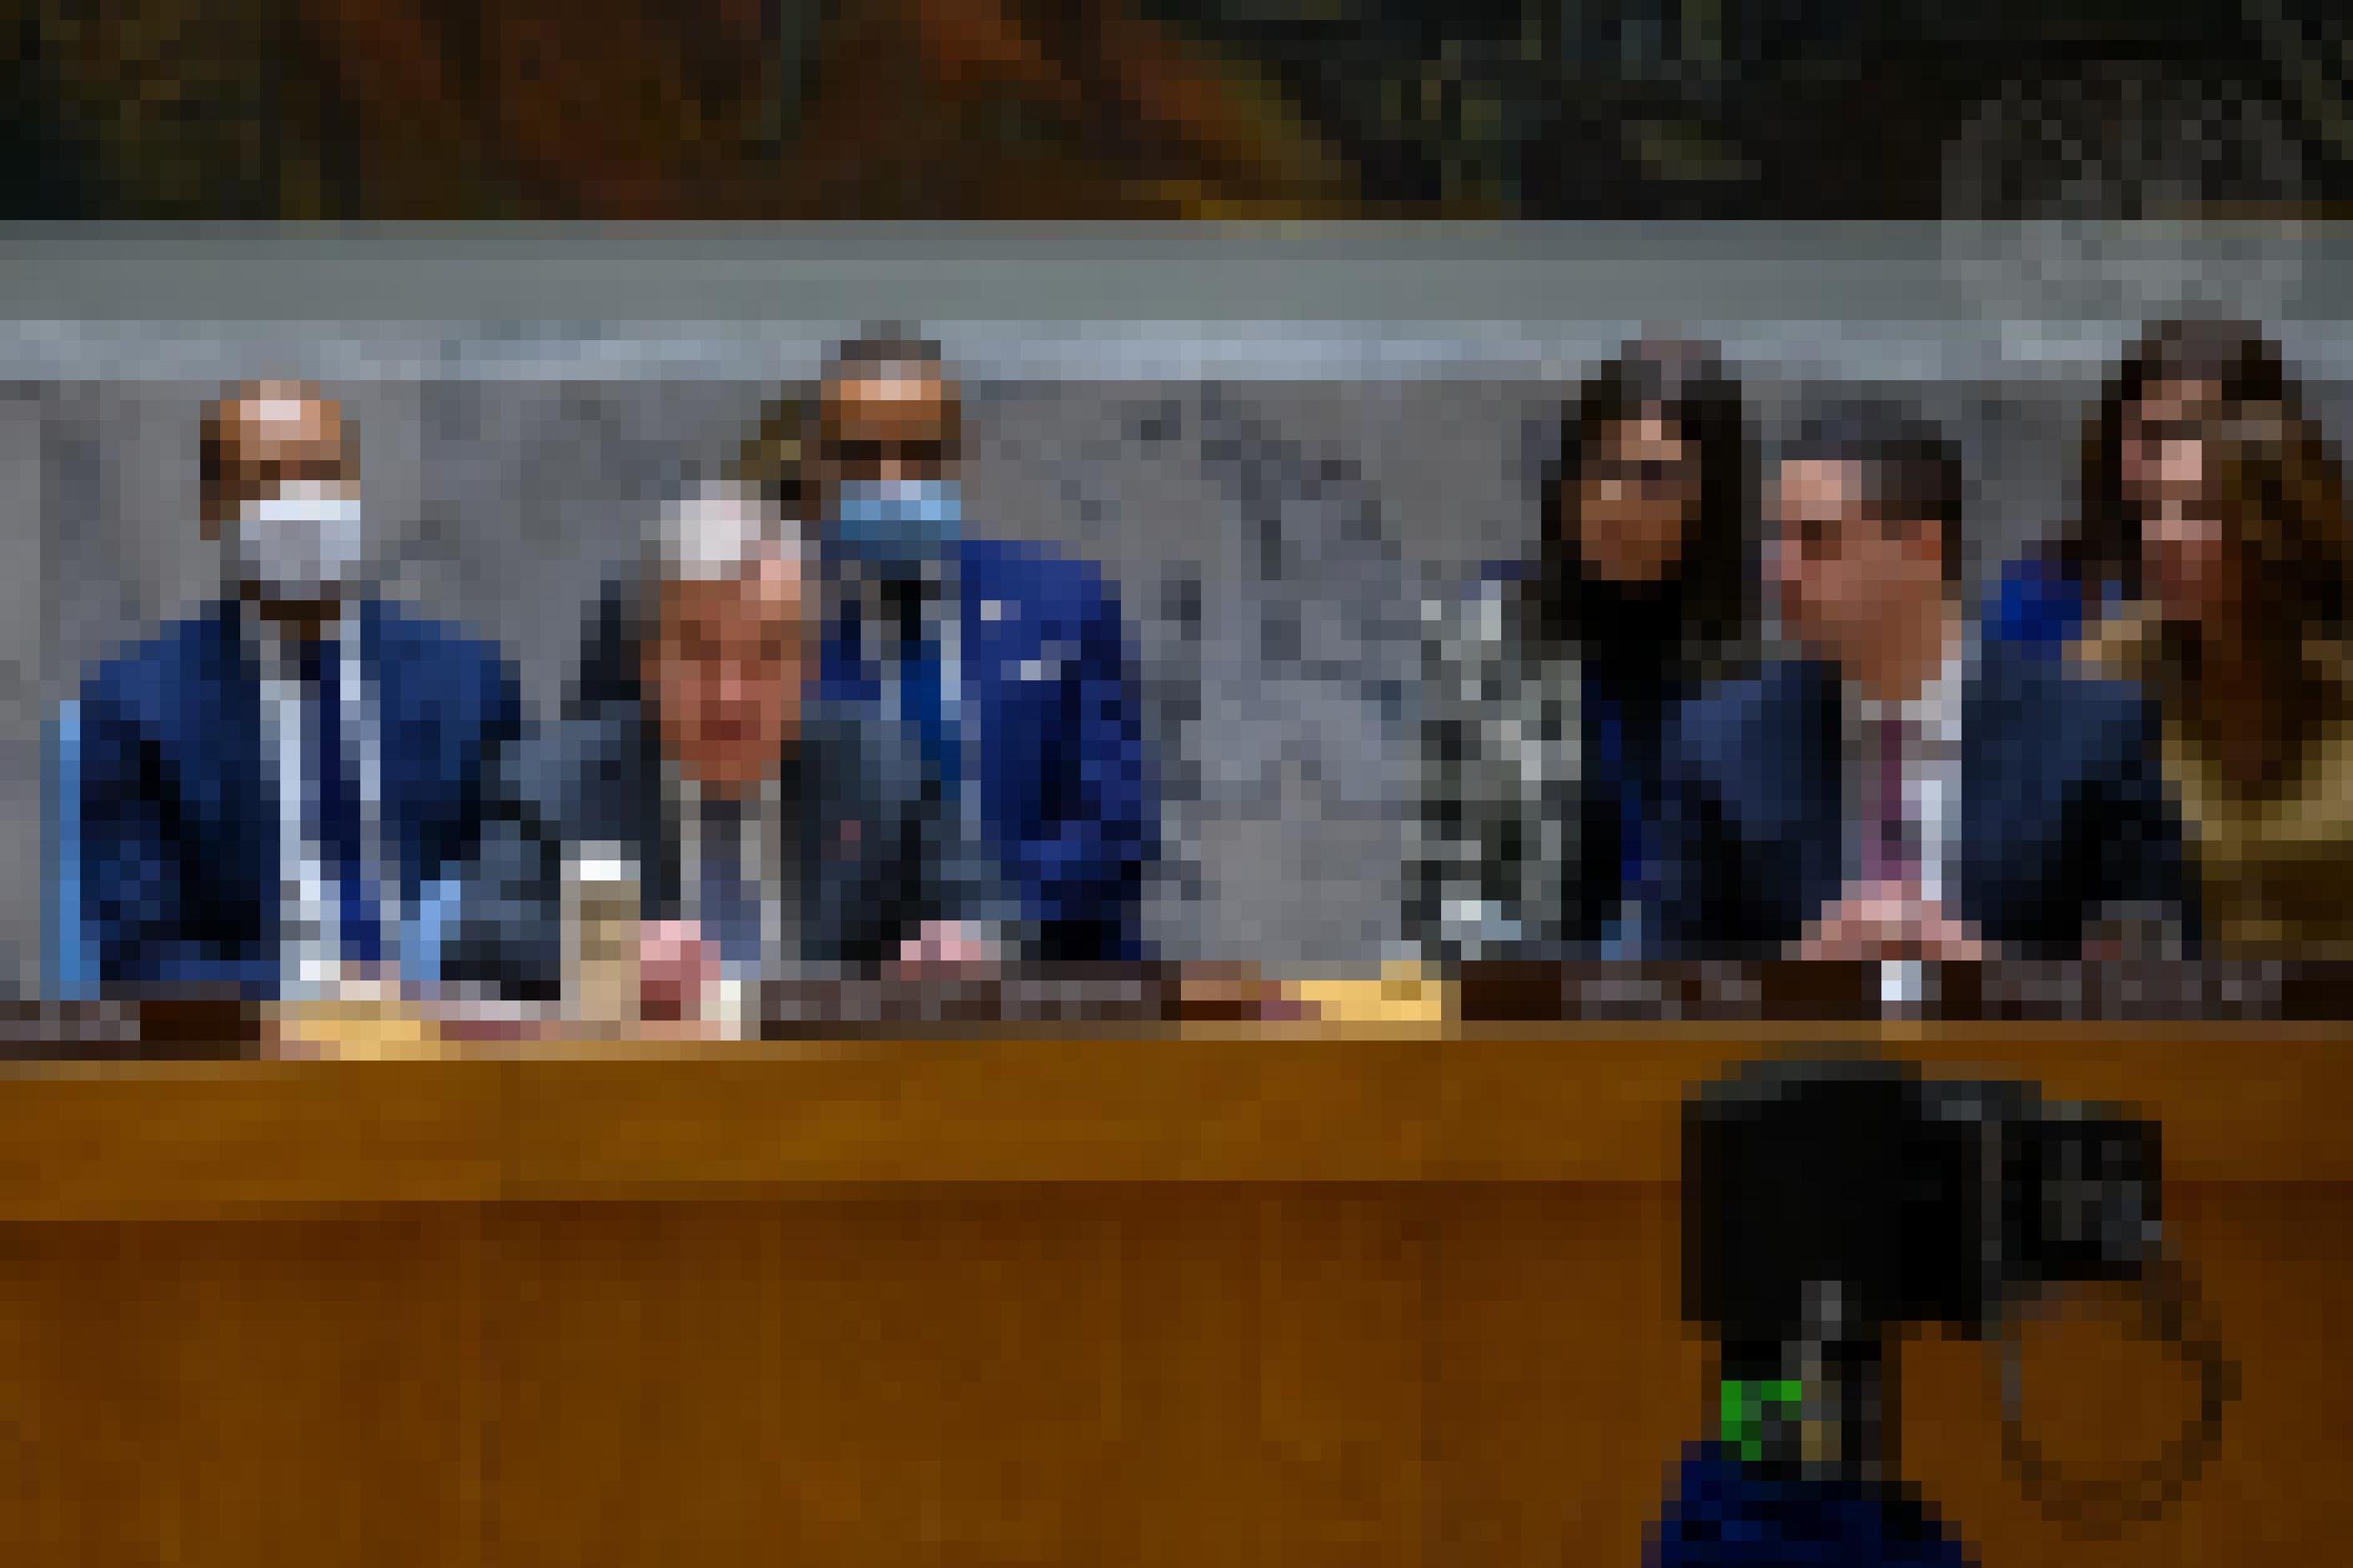 Secretary-General António Guterres (left at table) addresses the Security Council meeting on threats to international peace and security, with a focus on  Sea-level rise and its implications for international peace and security.
At right at table is Ian Borg, Minister for Foreign and European Affairs and Trade of Malta and President of the Security Council for the month of February.